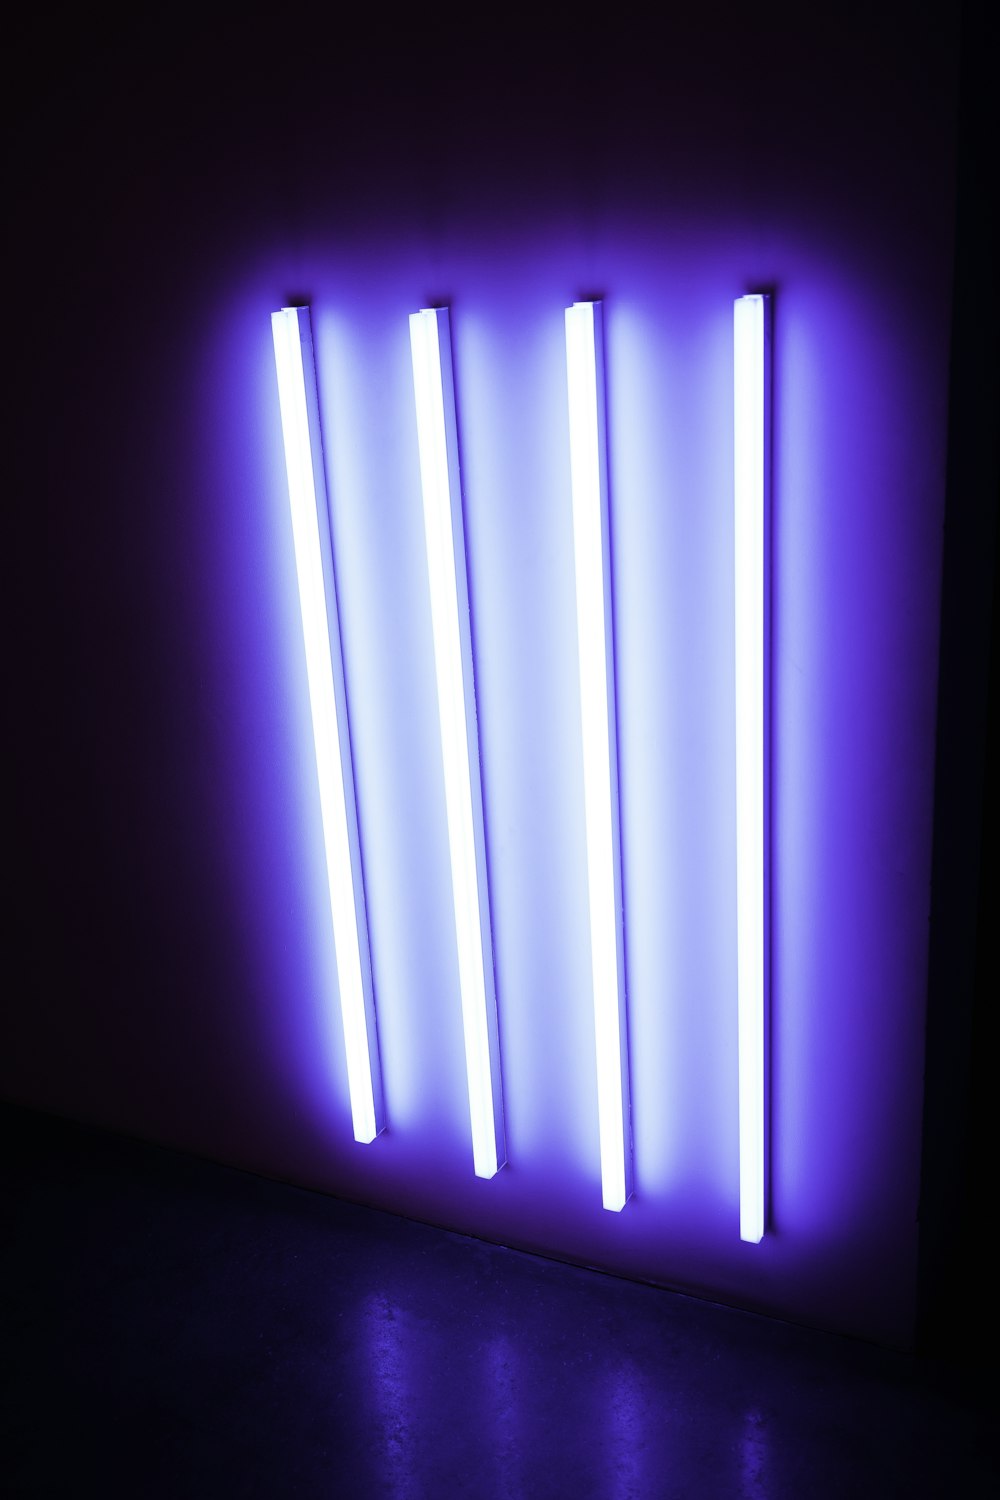 four UV fluorescent lamps turned on